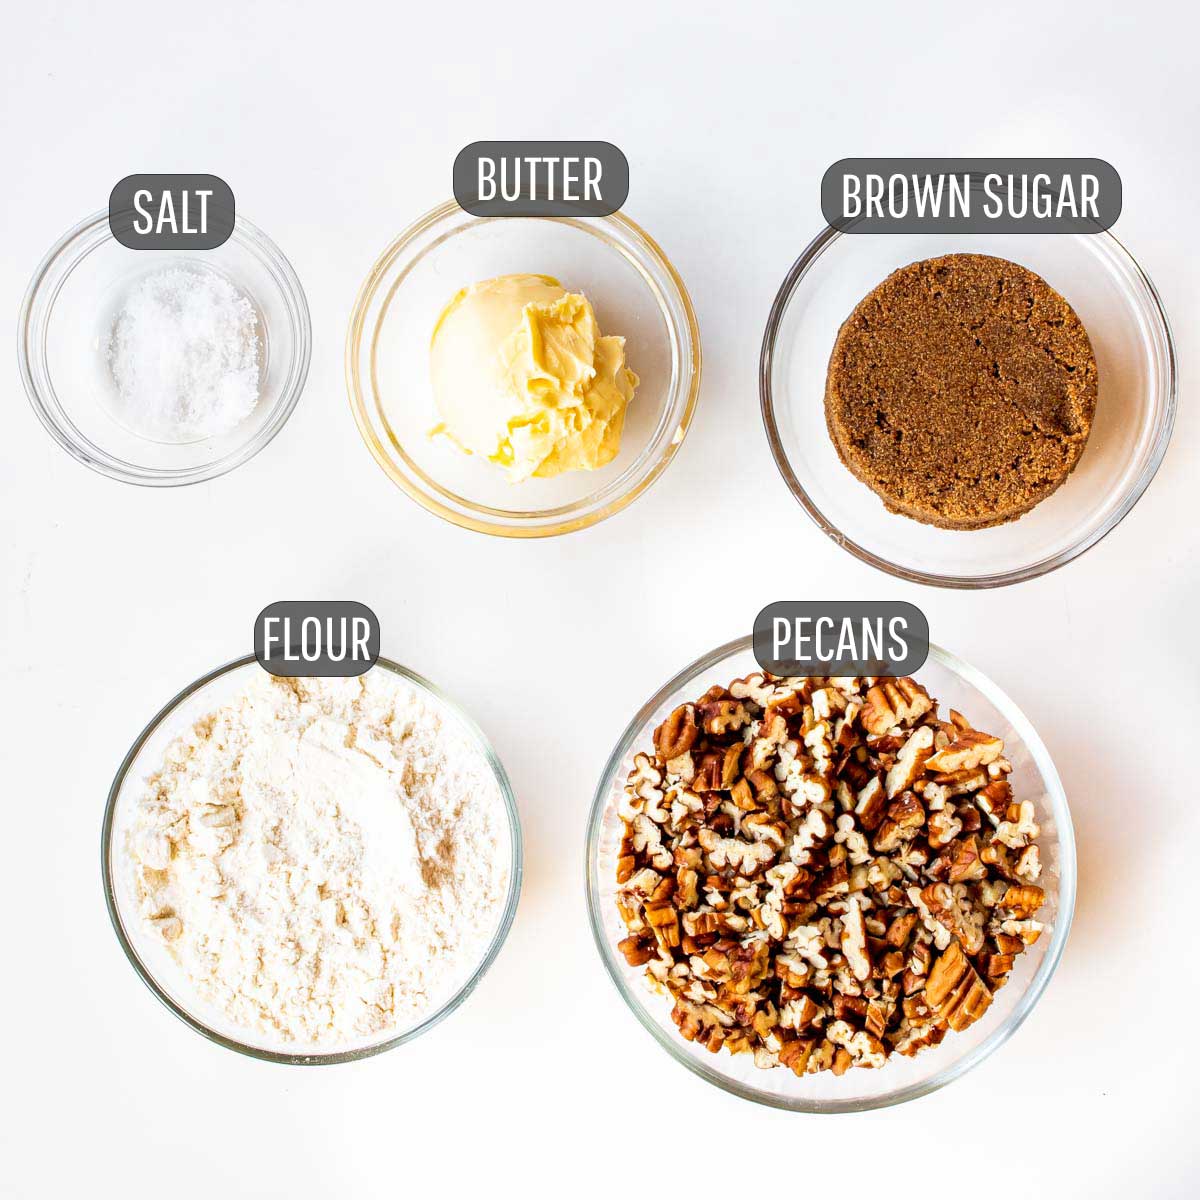 ingredients needed to make a crunchy topping for sweet potato casserole.